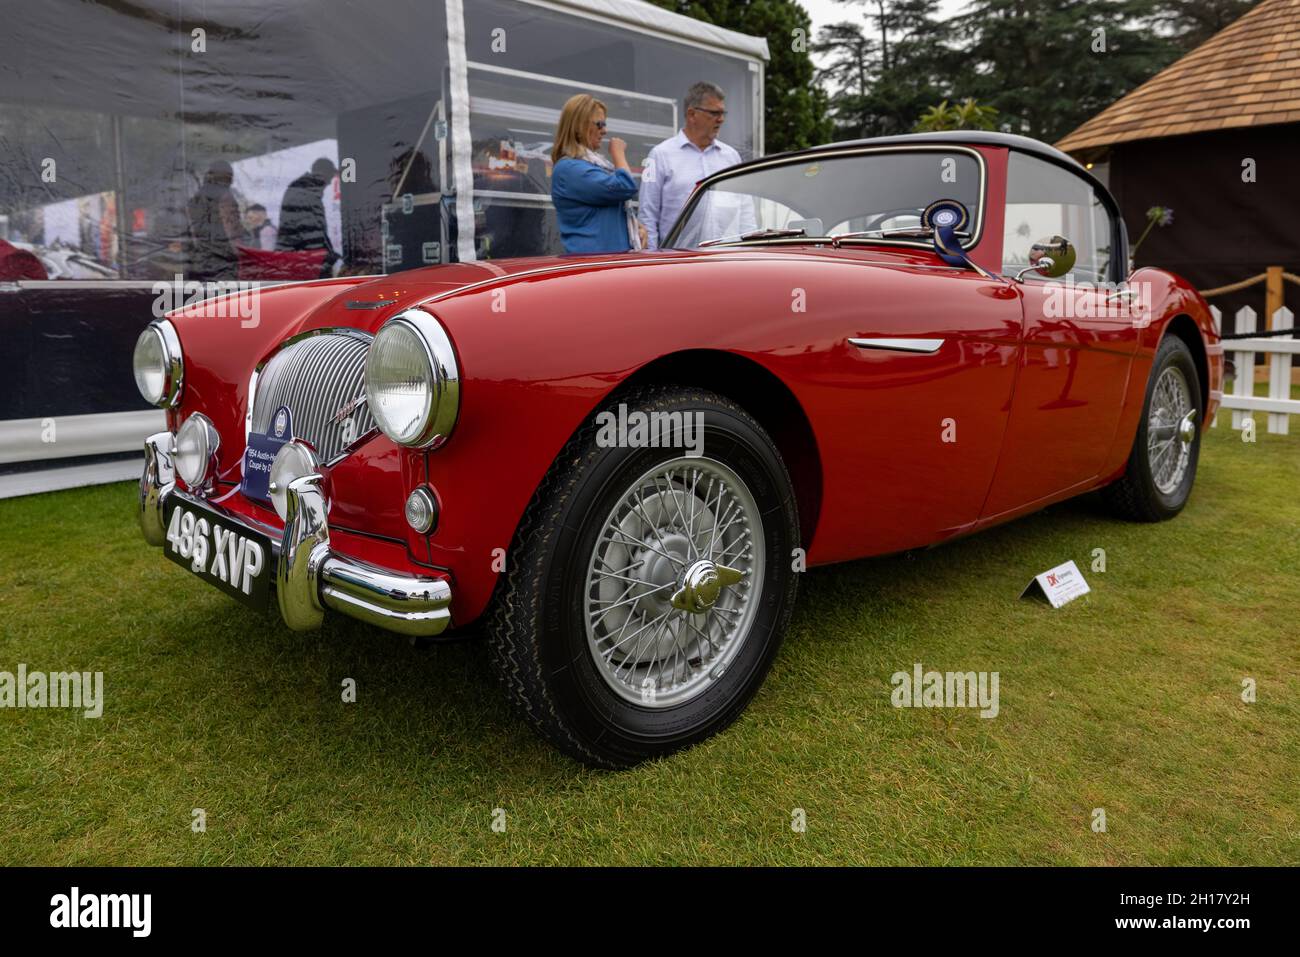 Austin-Healey 100 ‘486 XVP’ on display at the Concours d'Elegance held at Blenheim Palace on the 5th September 2021 Stock Photo